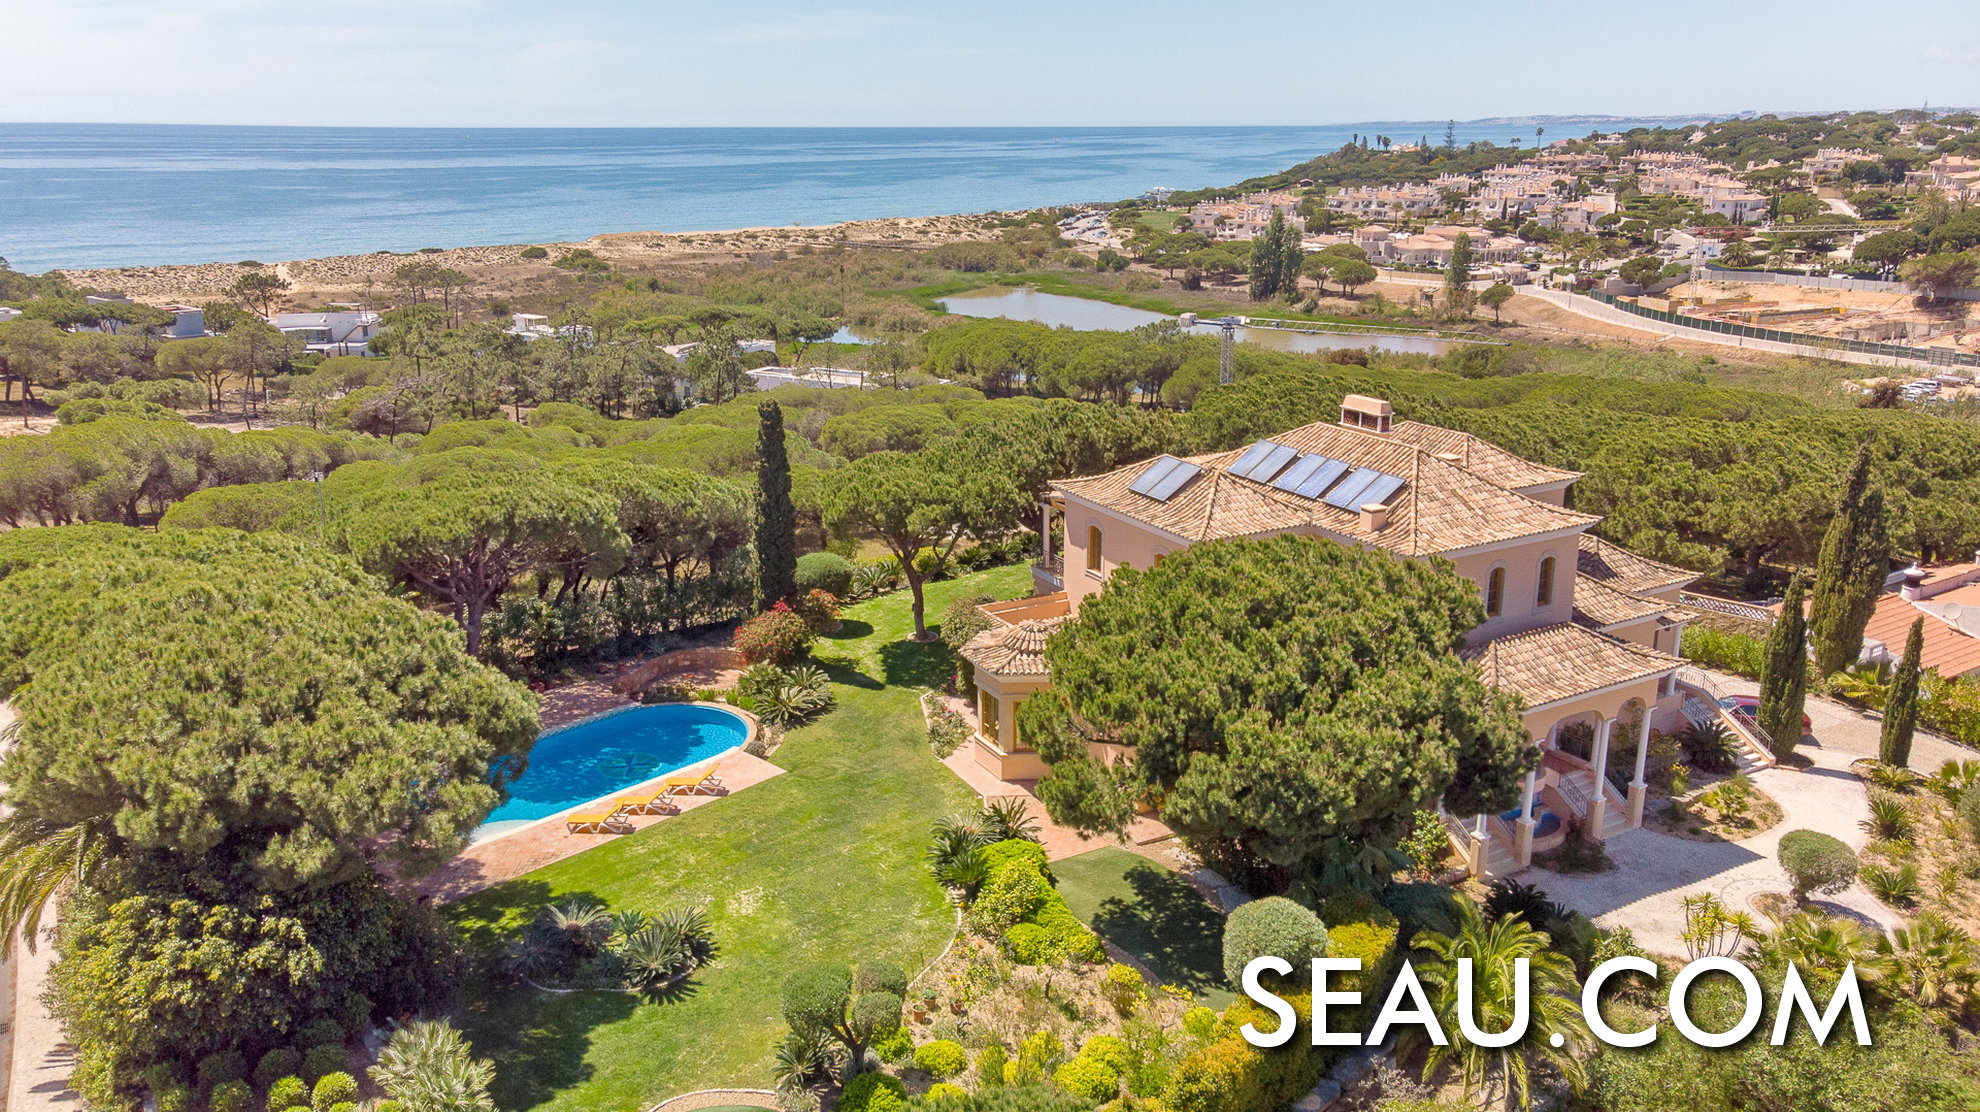 Spectacular location for living in Portugal, a villa with sea views, surrounded by nature in the resort of Vale do Lobo, Algarve